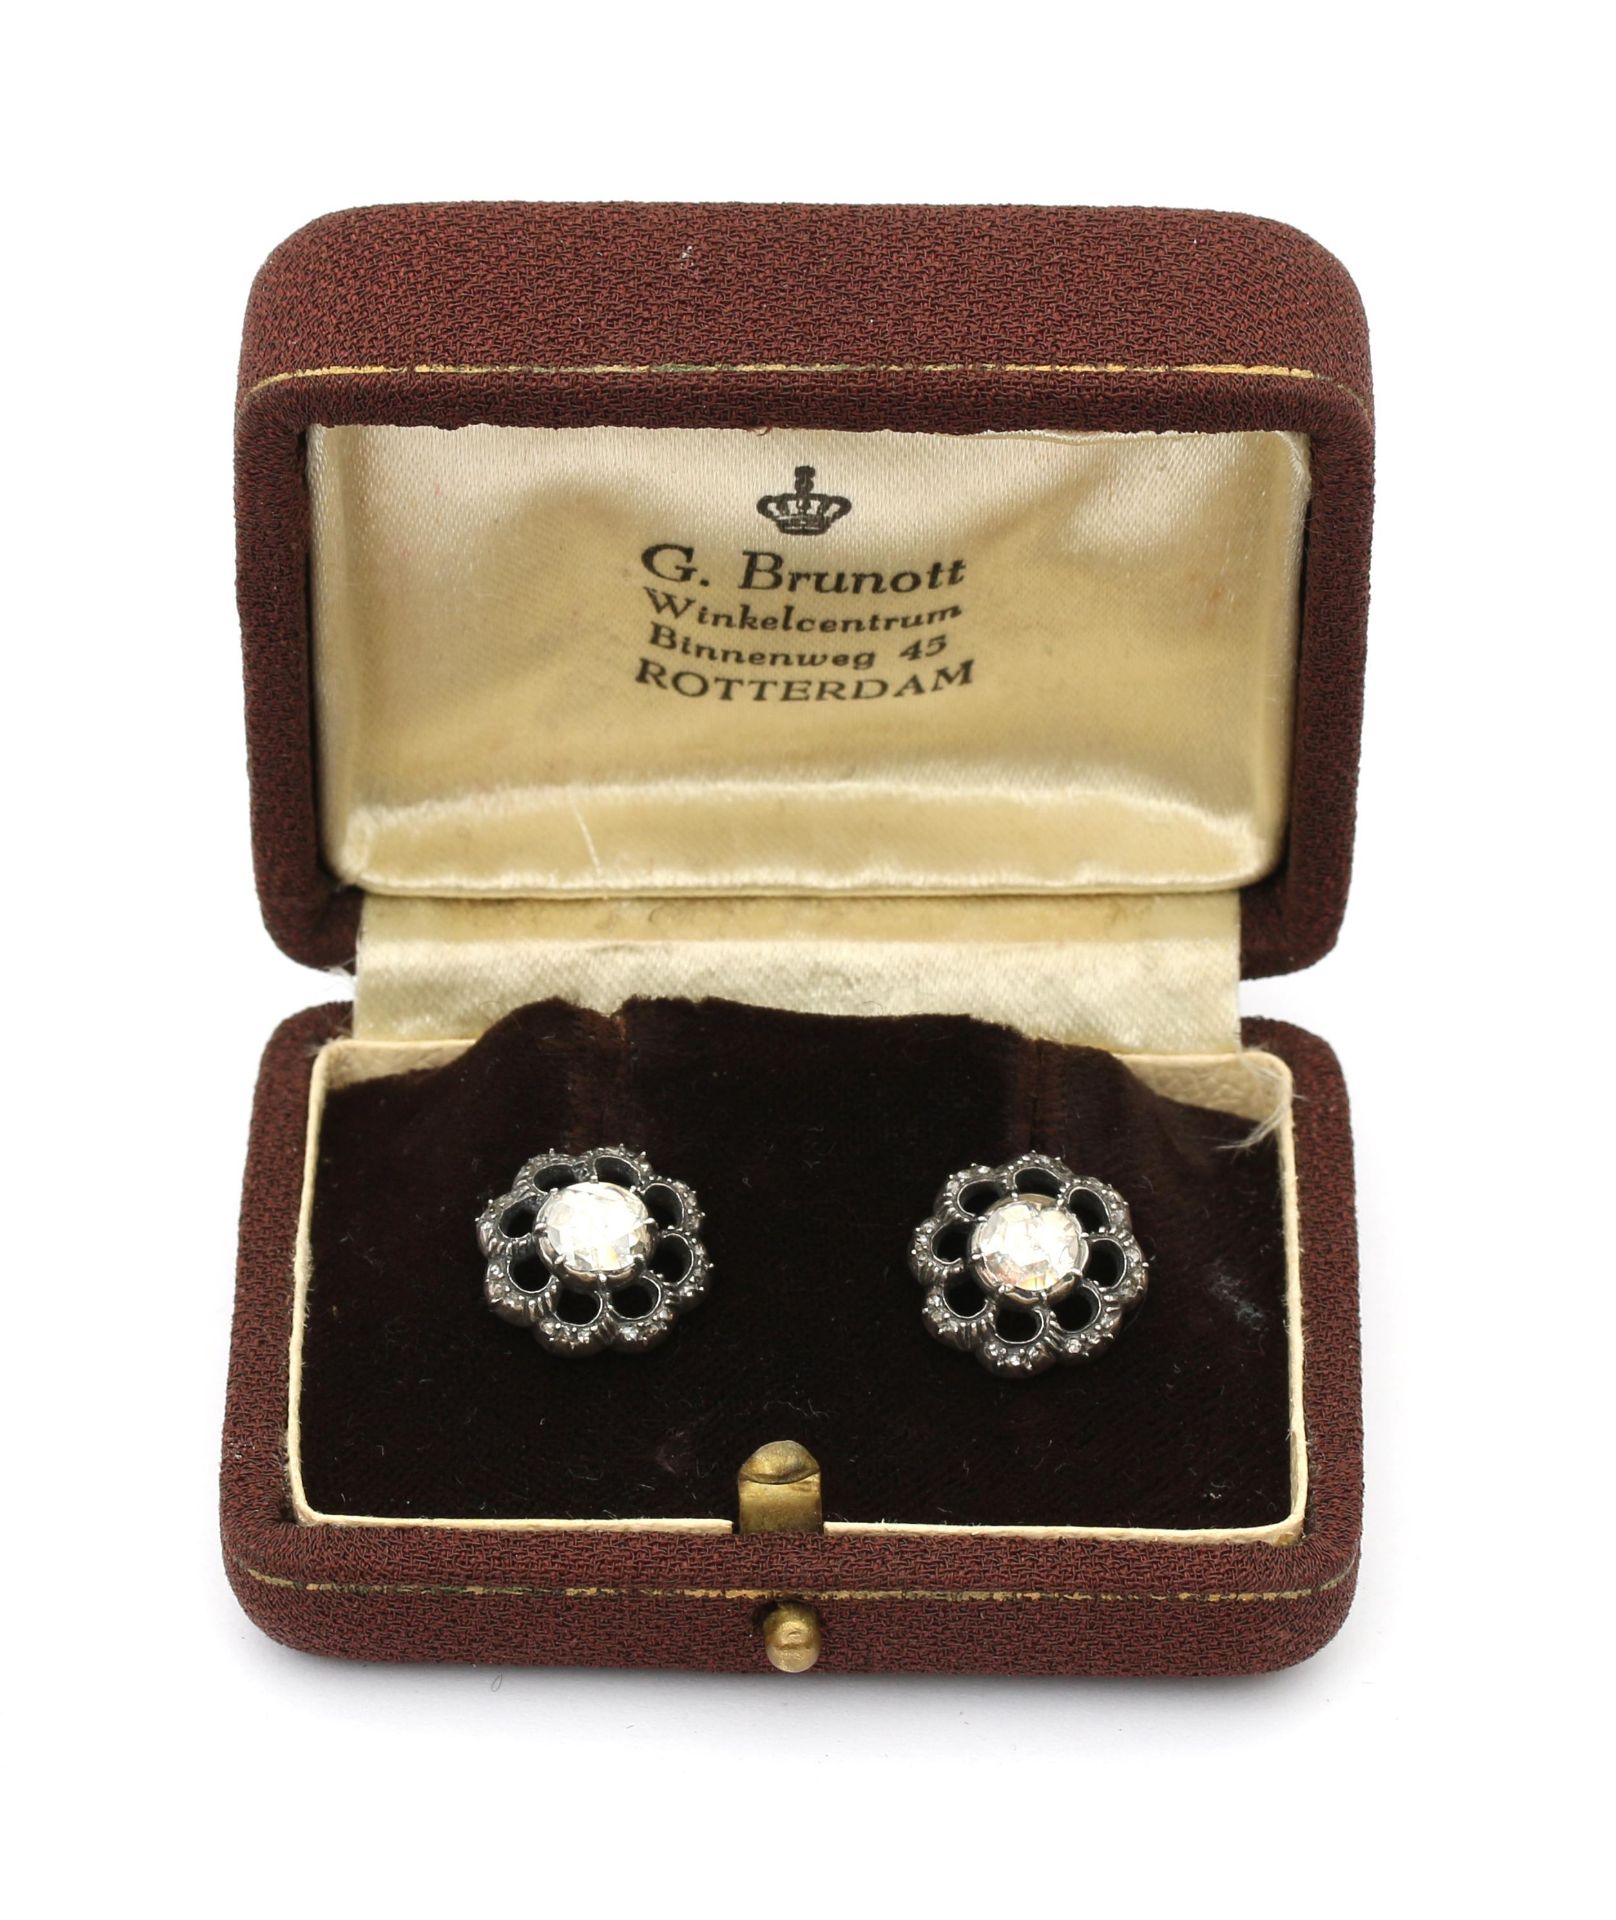 A pair of 14 karat gold and silver rose cut diamond ear studs - Image 2 of 2